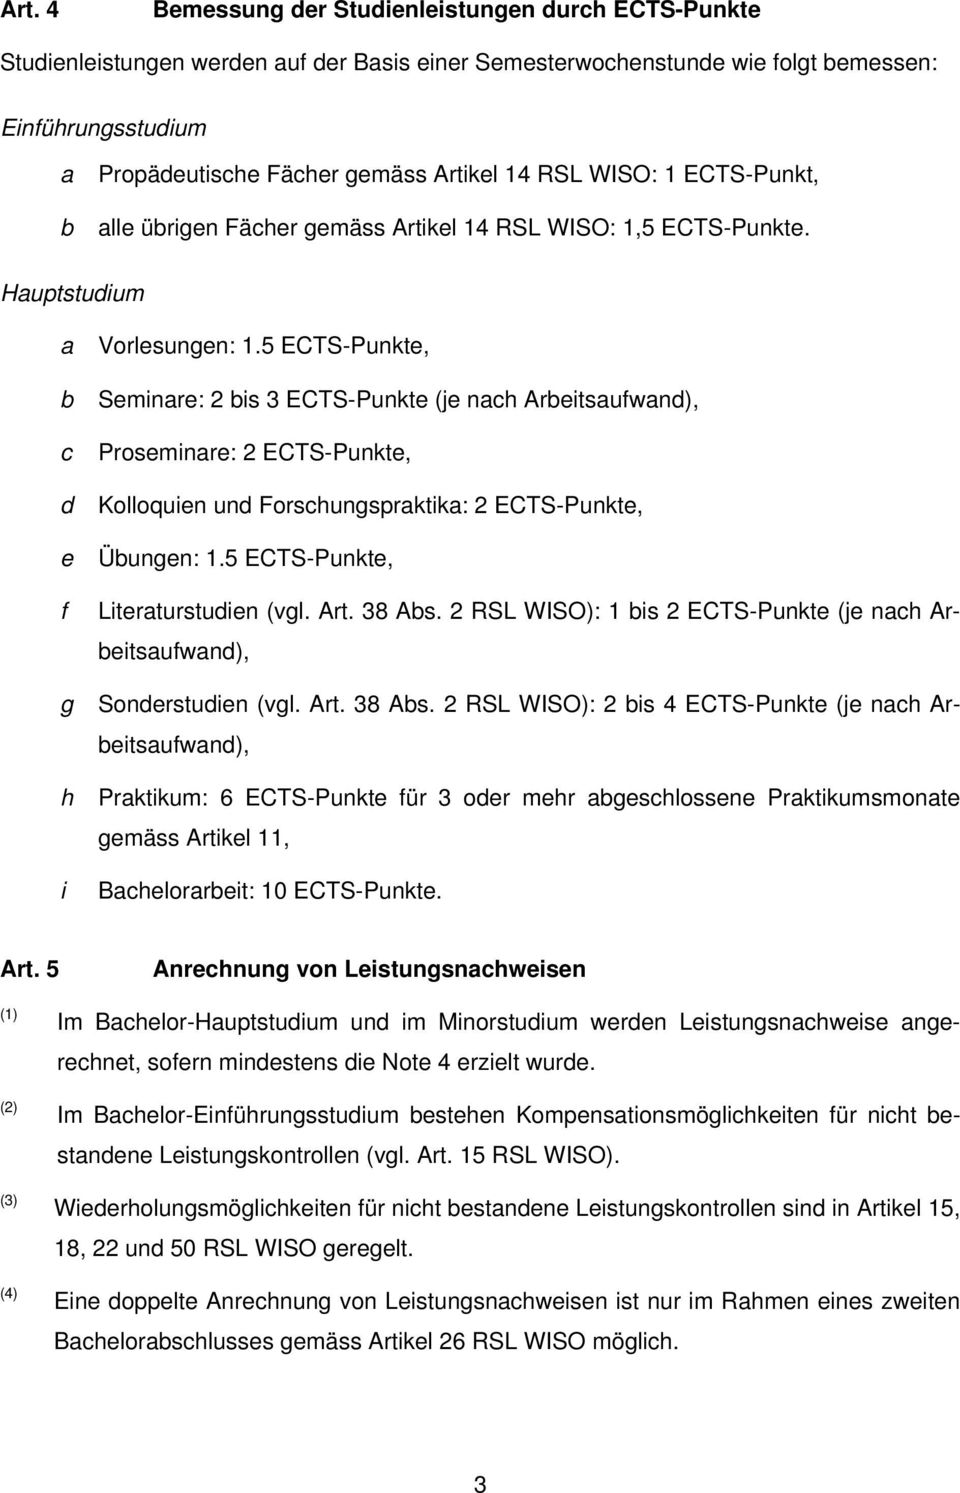 5 ECTS-Punkte, Seminre: 2 is 3 ECTS-Punkte (je nh Areitsufwn), Proseminre: 2 ECTS-Punkte, Kolloquien un Forshungsprktik: 2 ECTS-Punkte, Üungen: 1.5 ECTS-Punkte, Literturstuien (vgl. Art. 38 As.